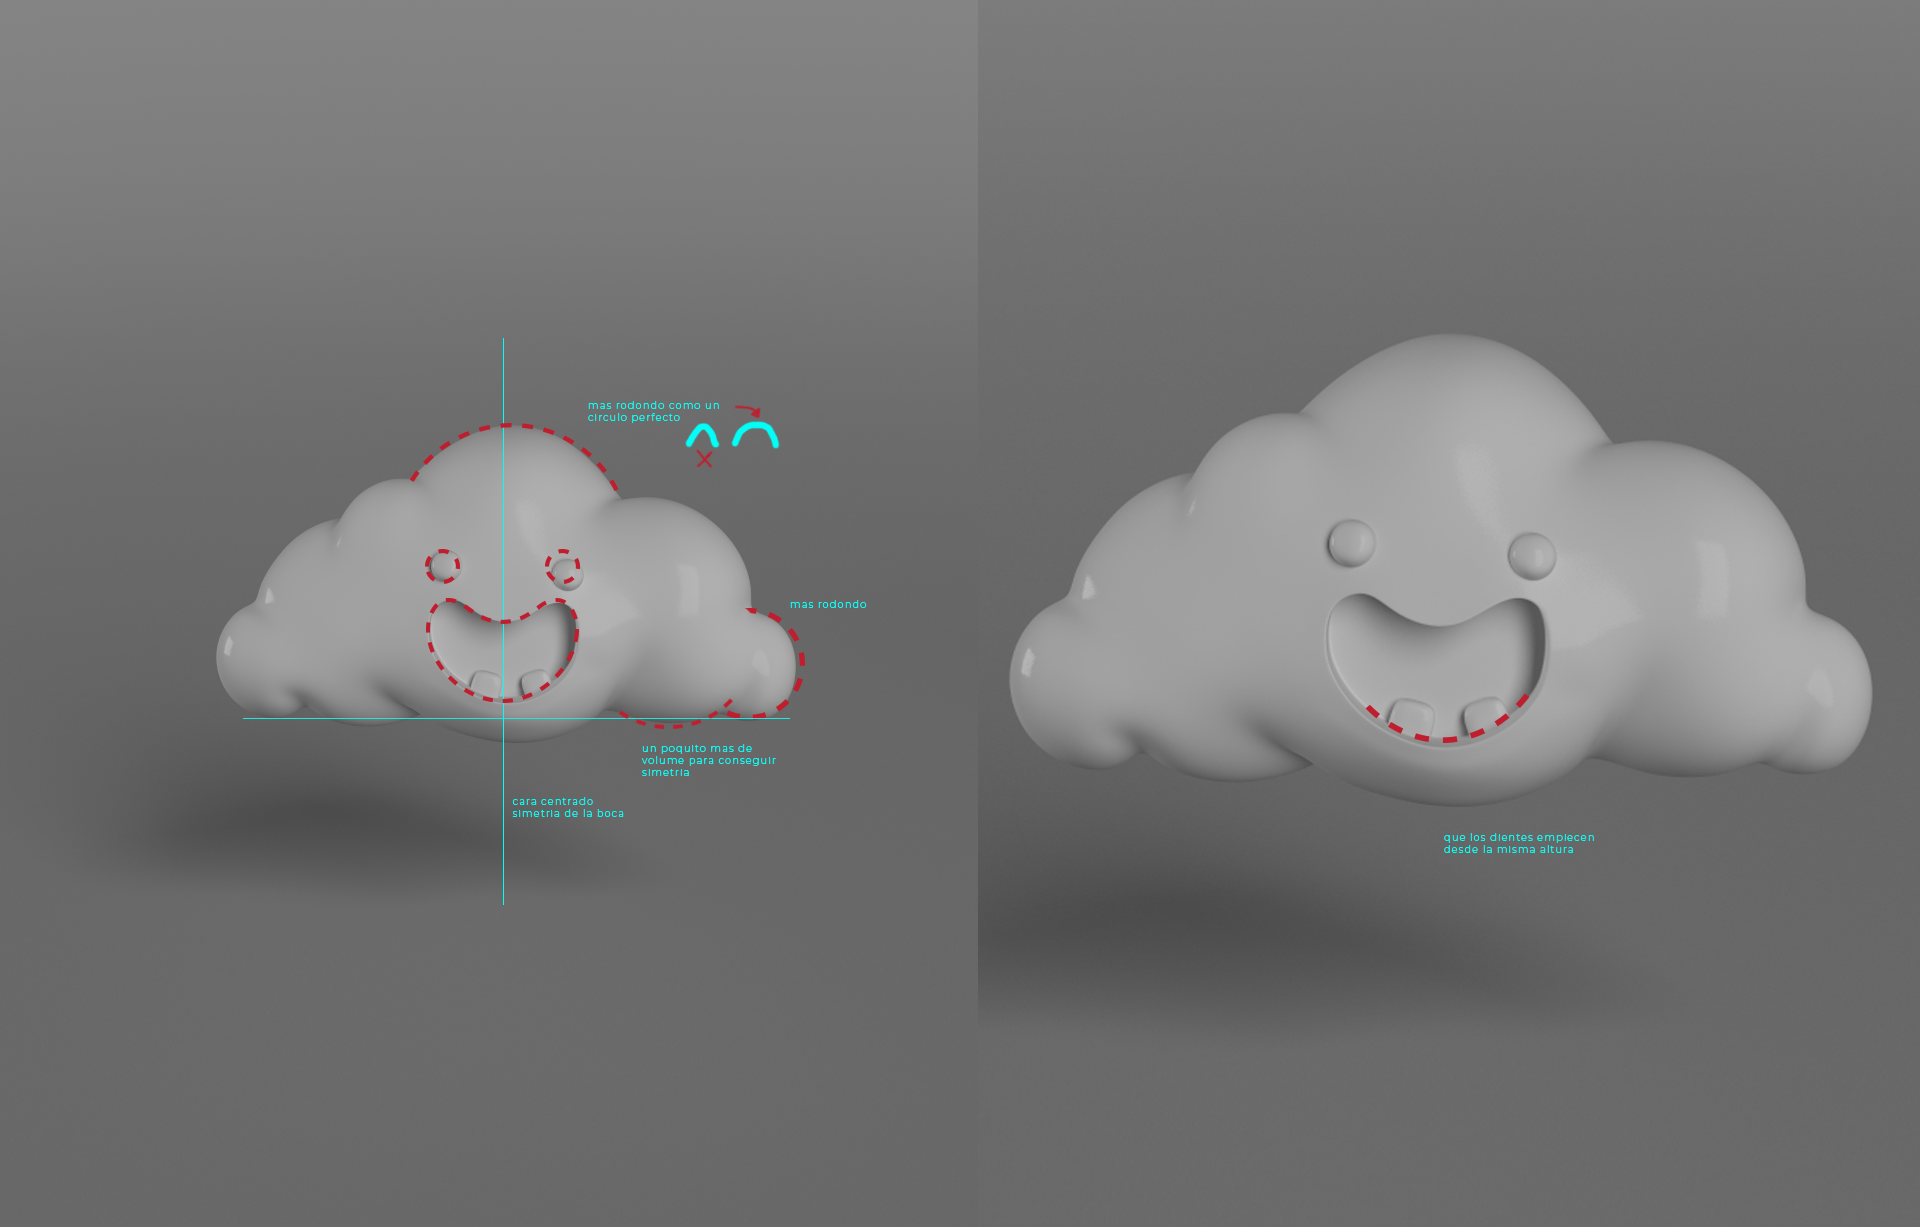 Correction notes on top of a cloud render